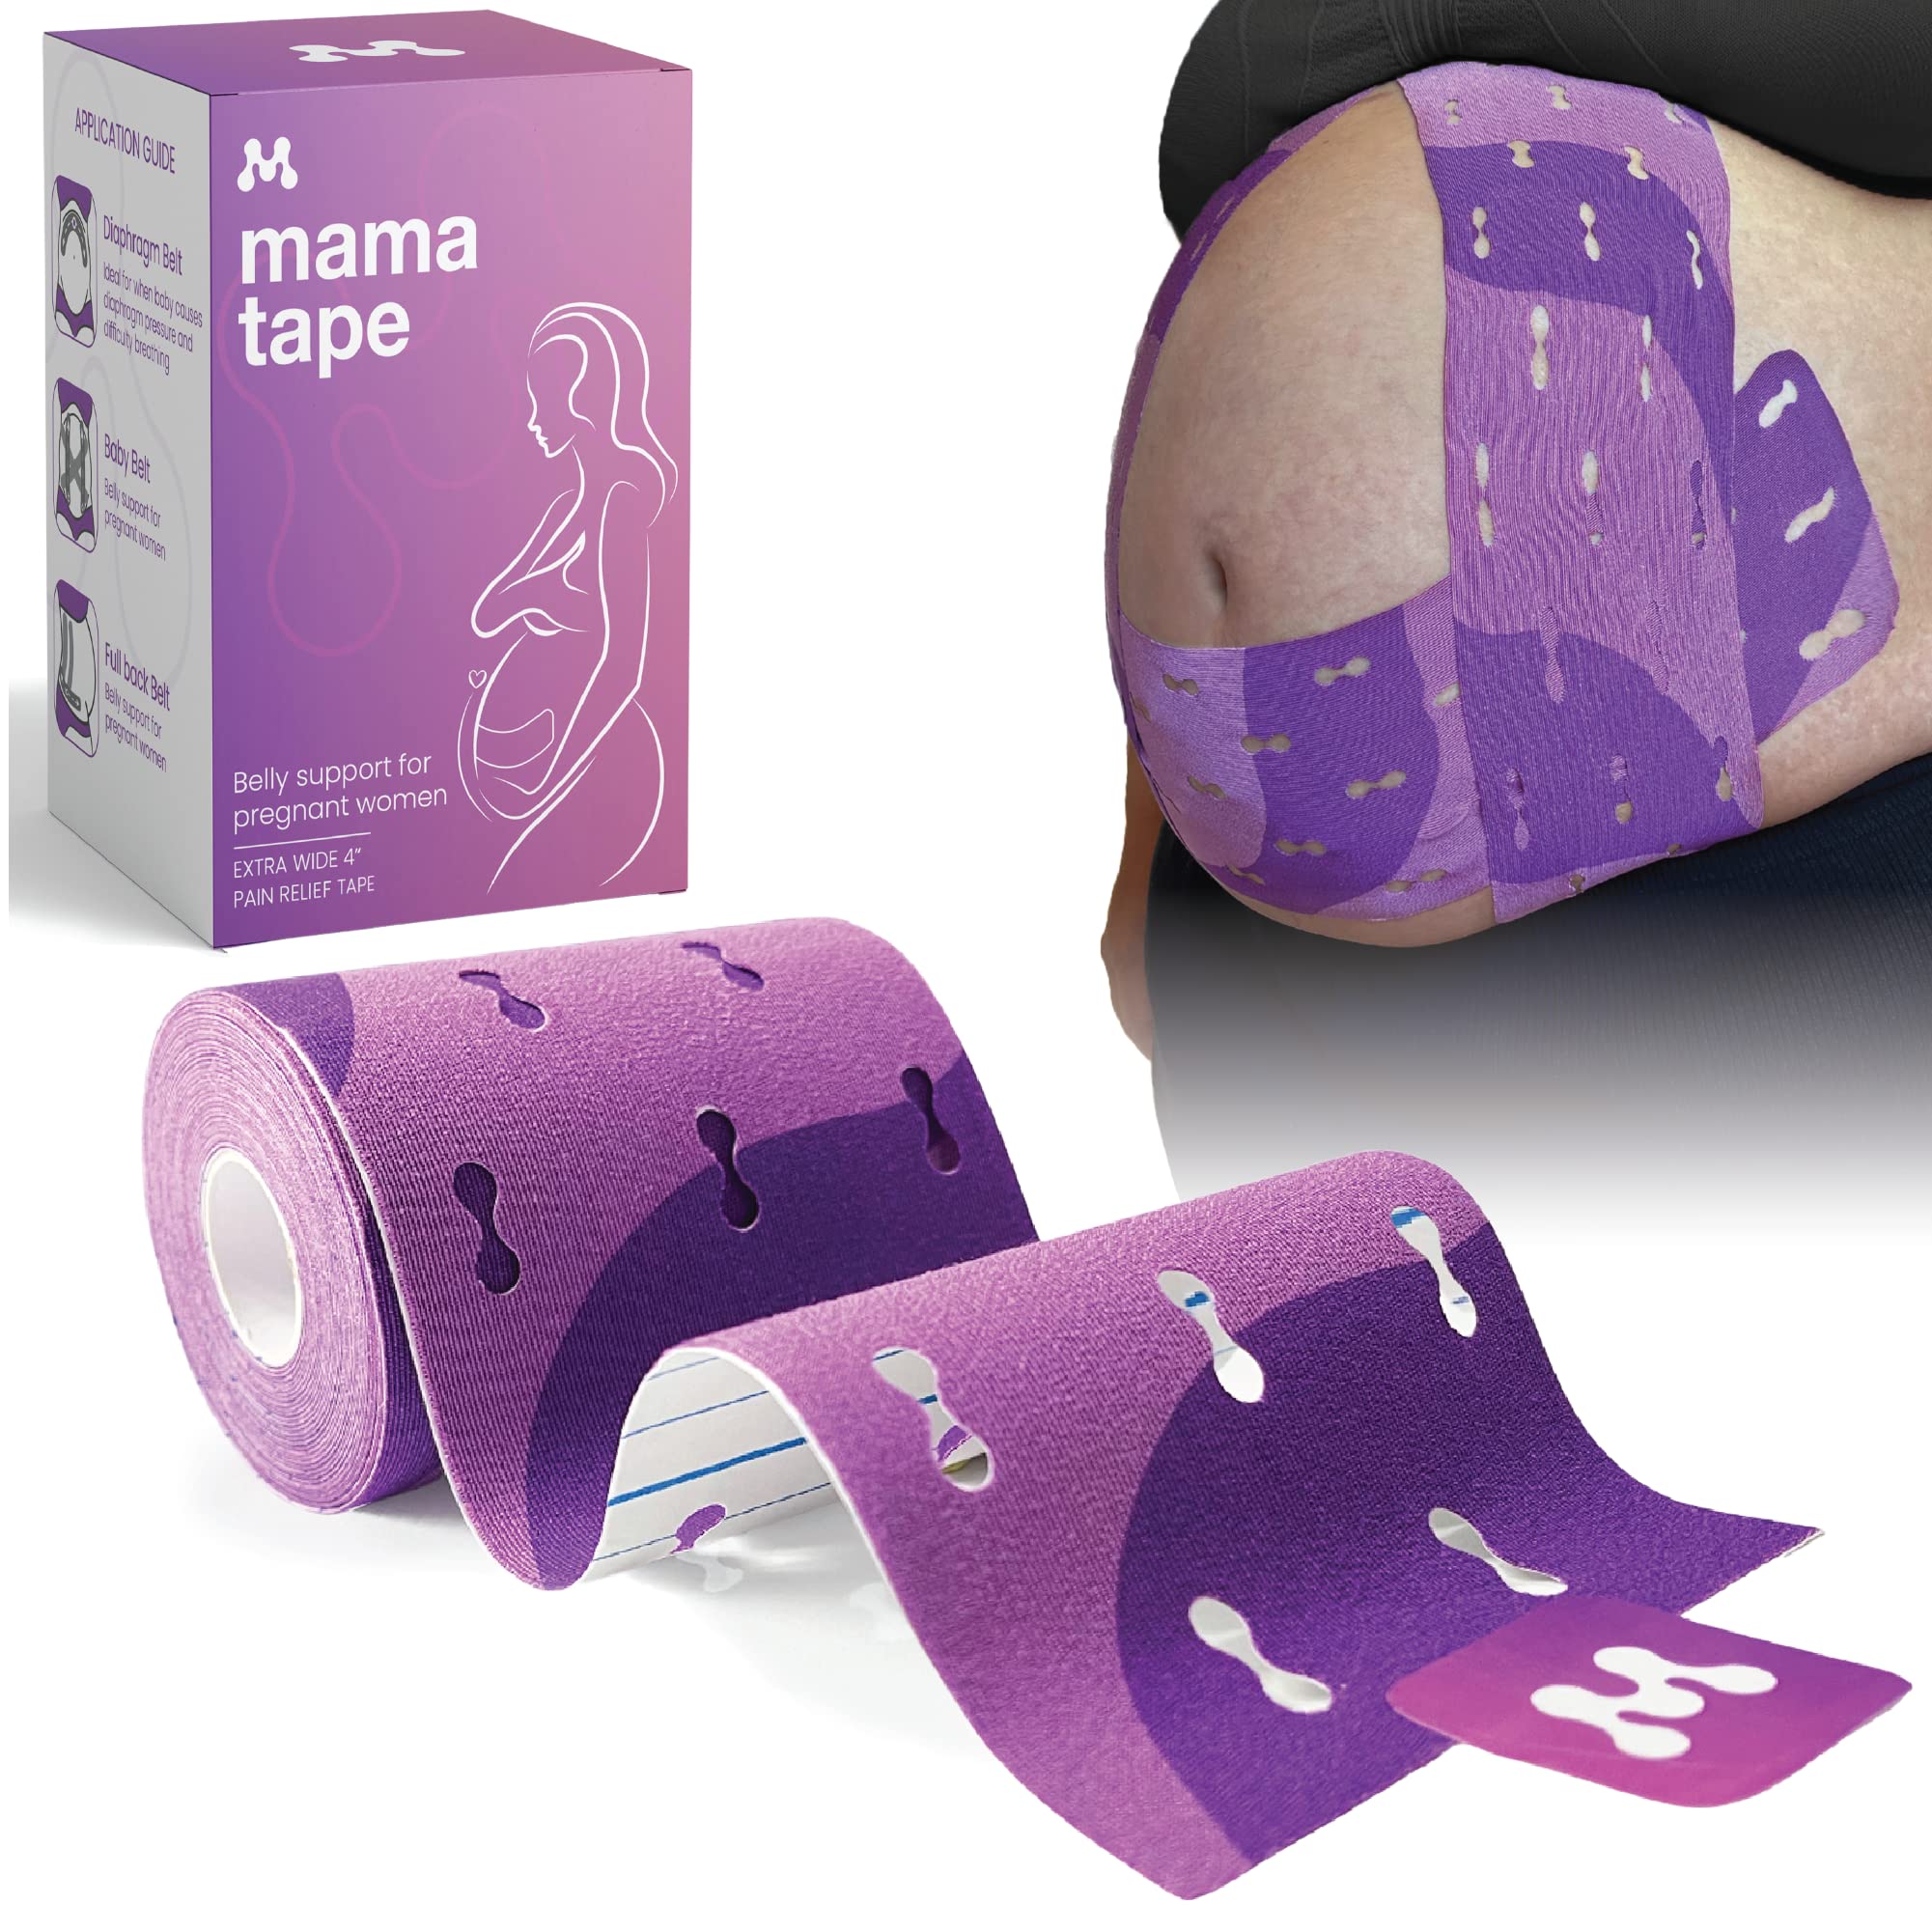 Pregnancy Tape, Belly Support Tape for Maternity Women, Pregnancy